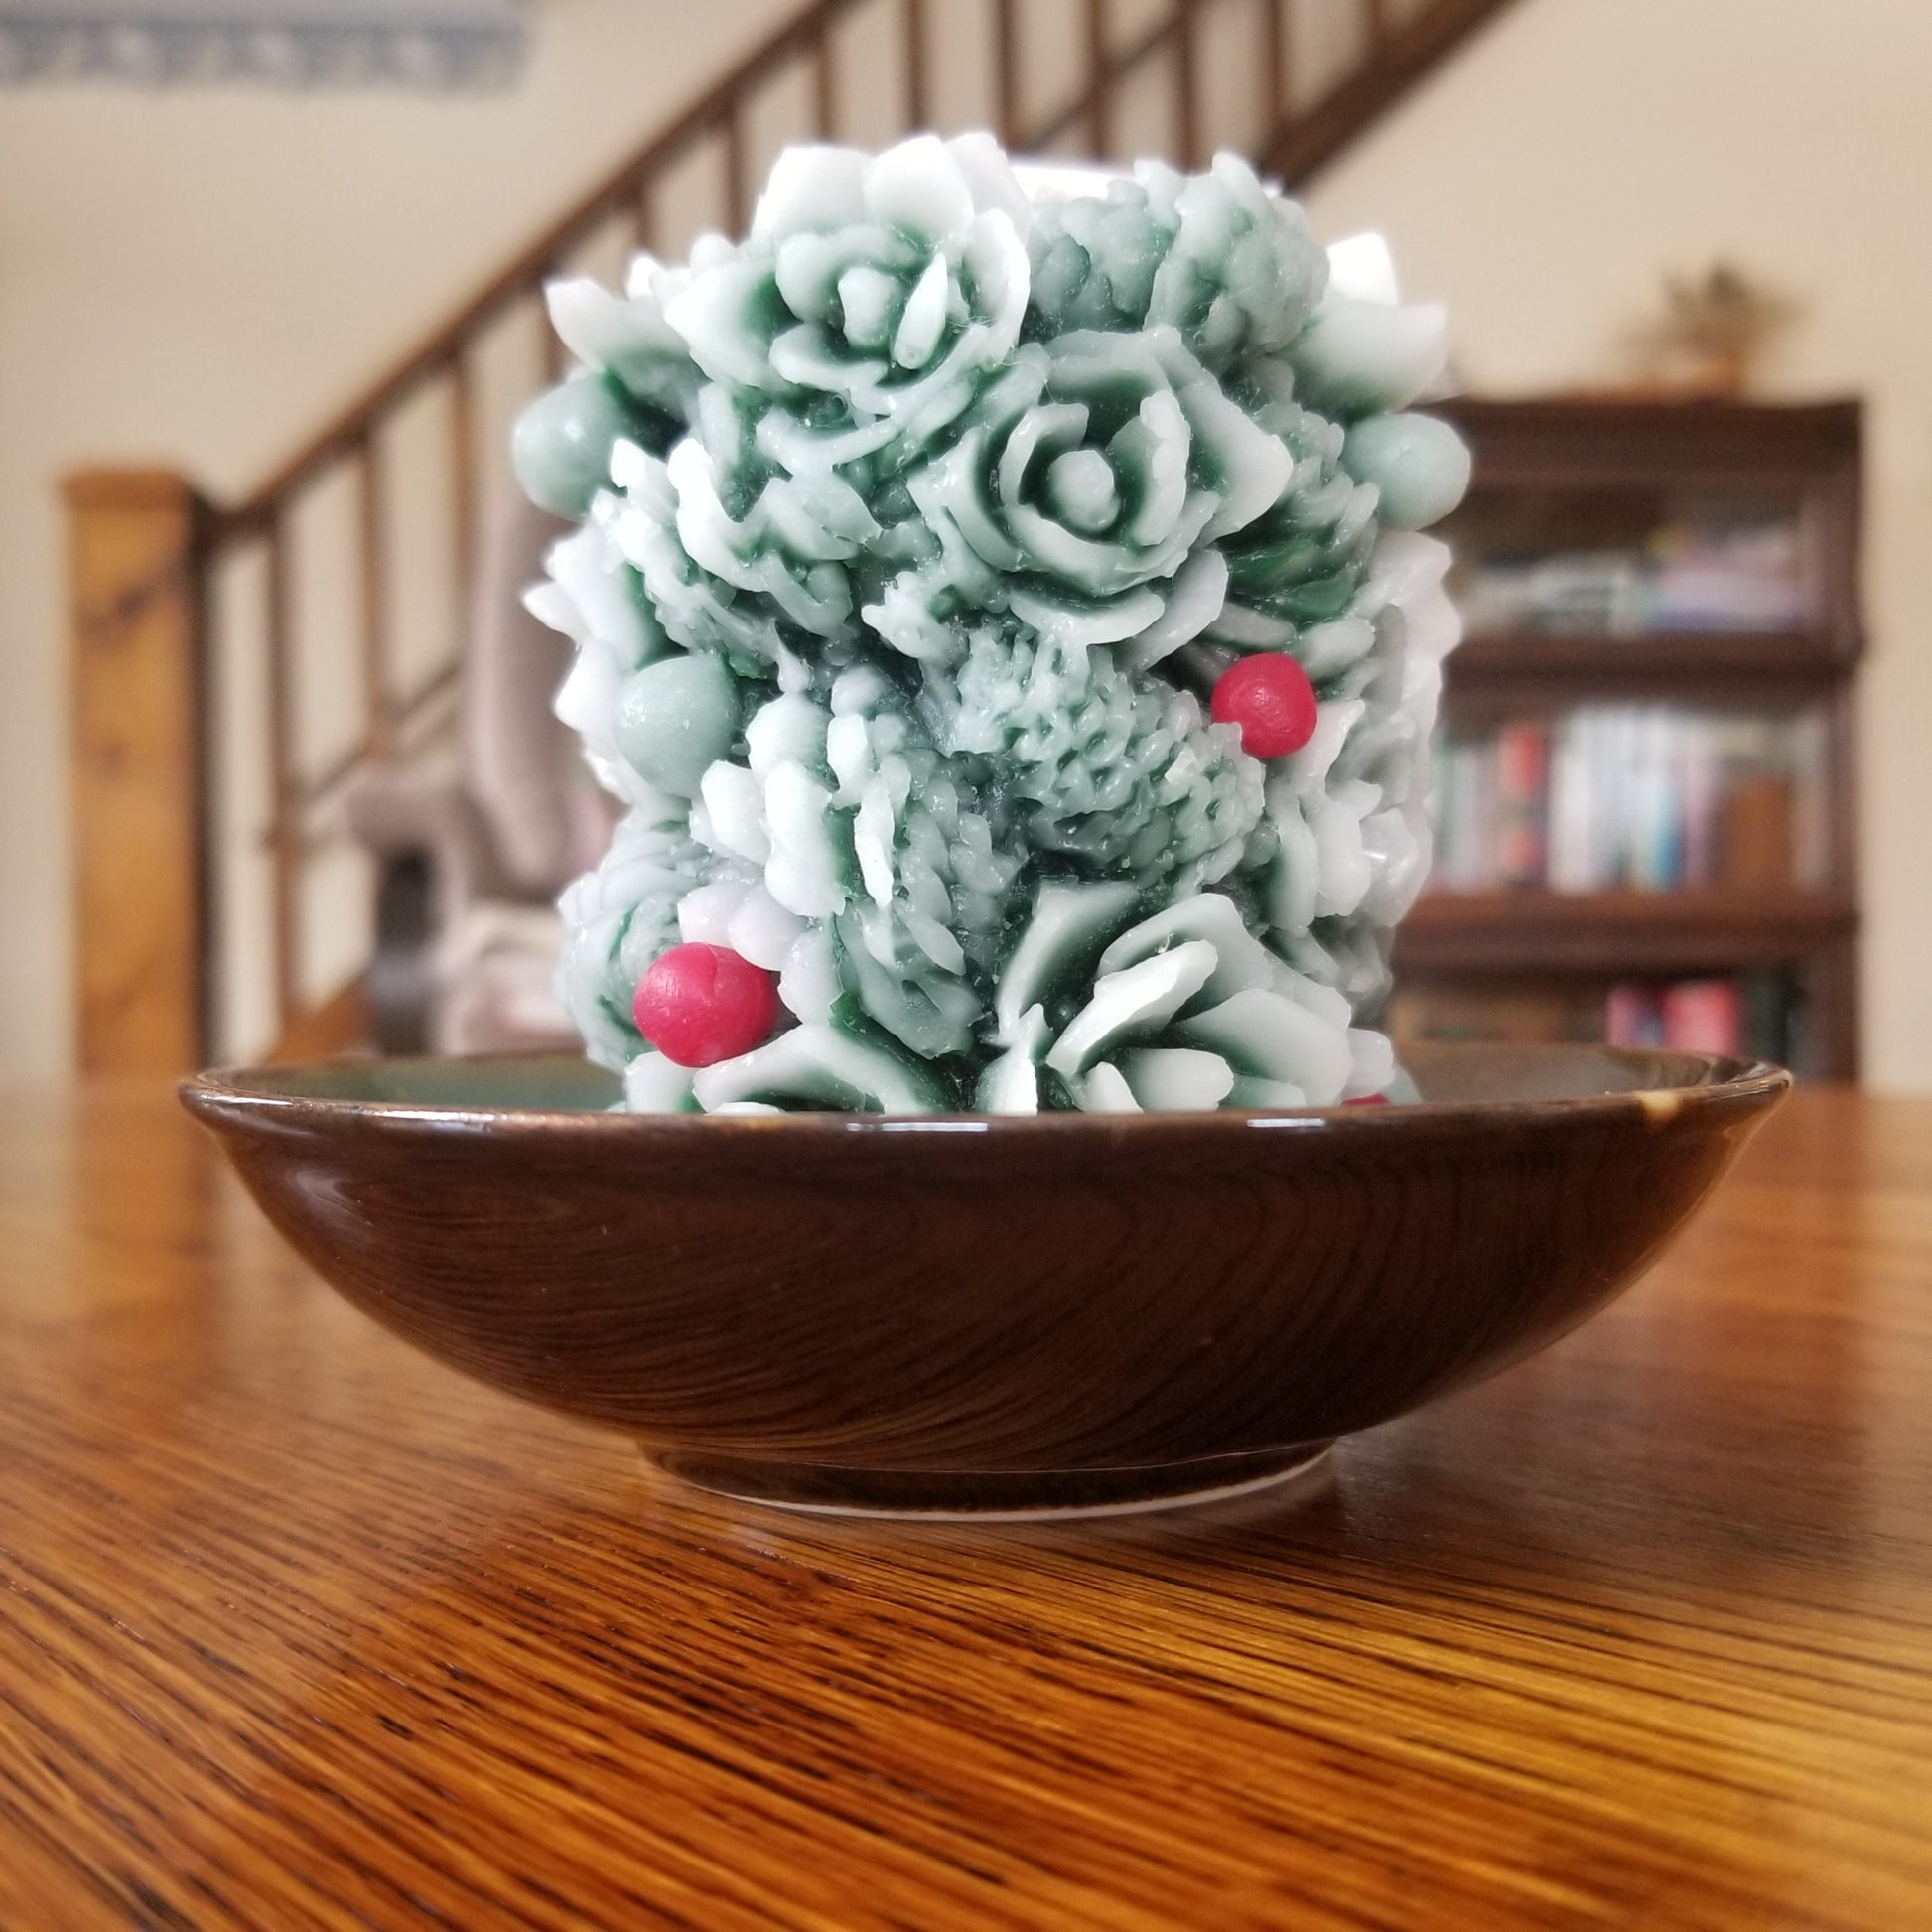 Beeswax greenery pillar; green with white frosting effect and red berries